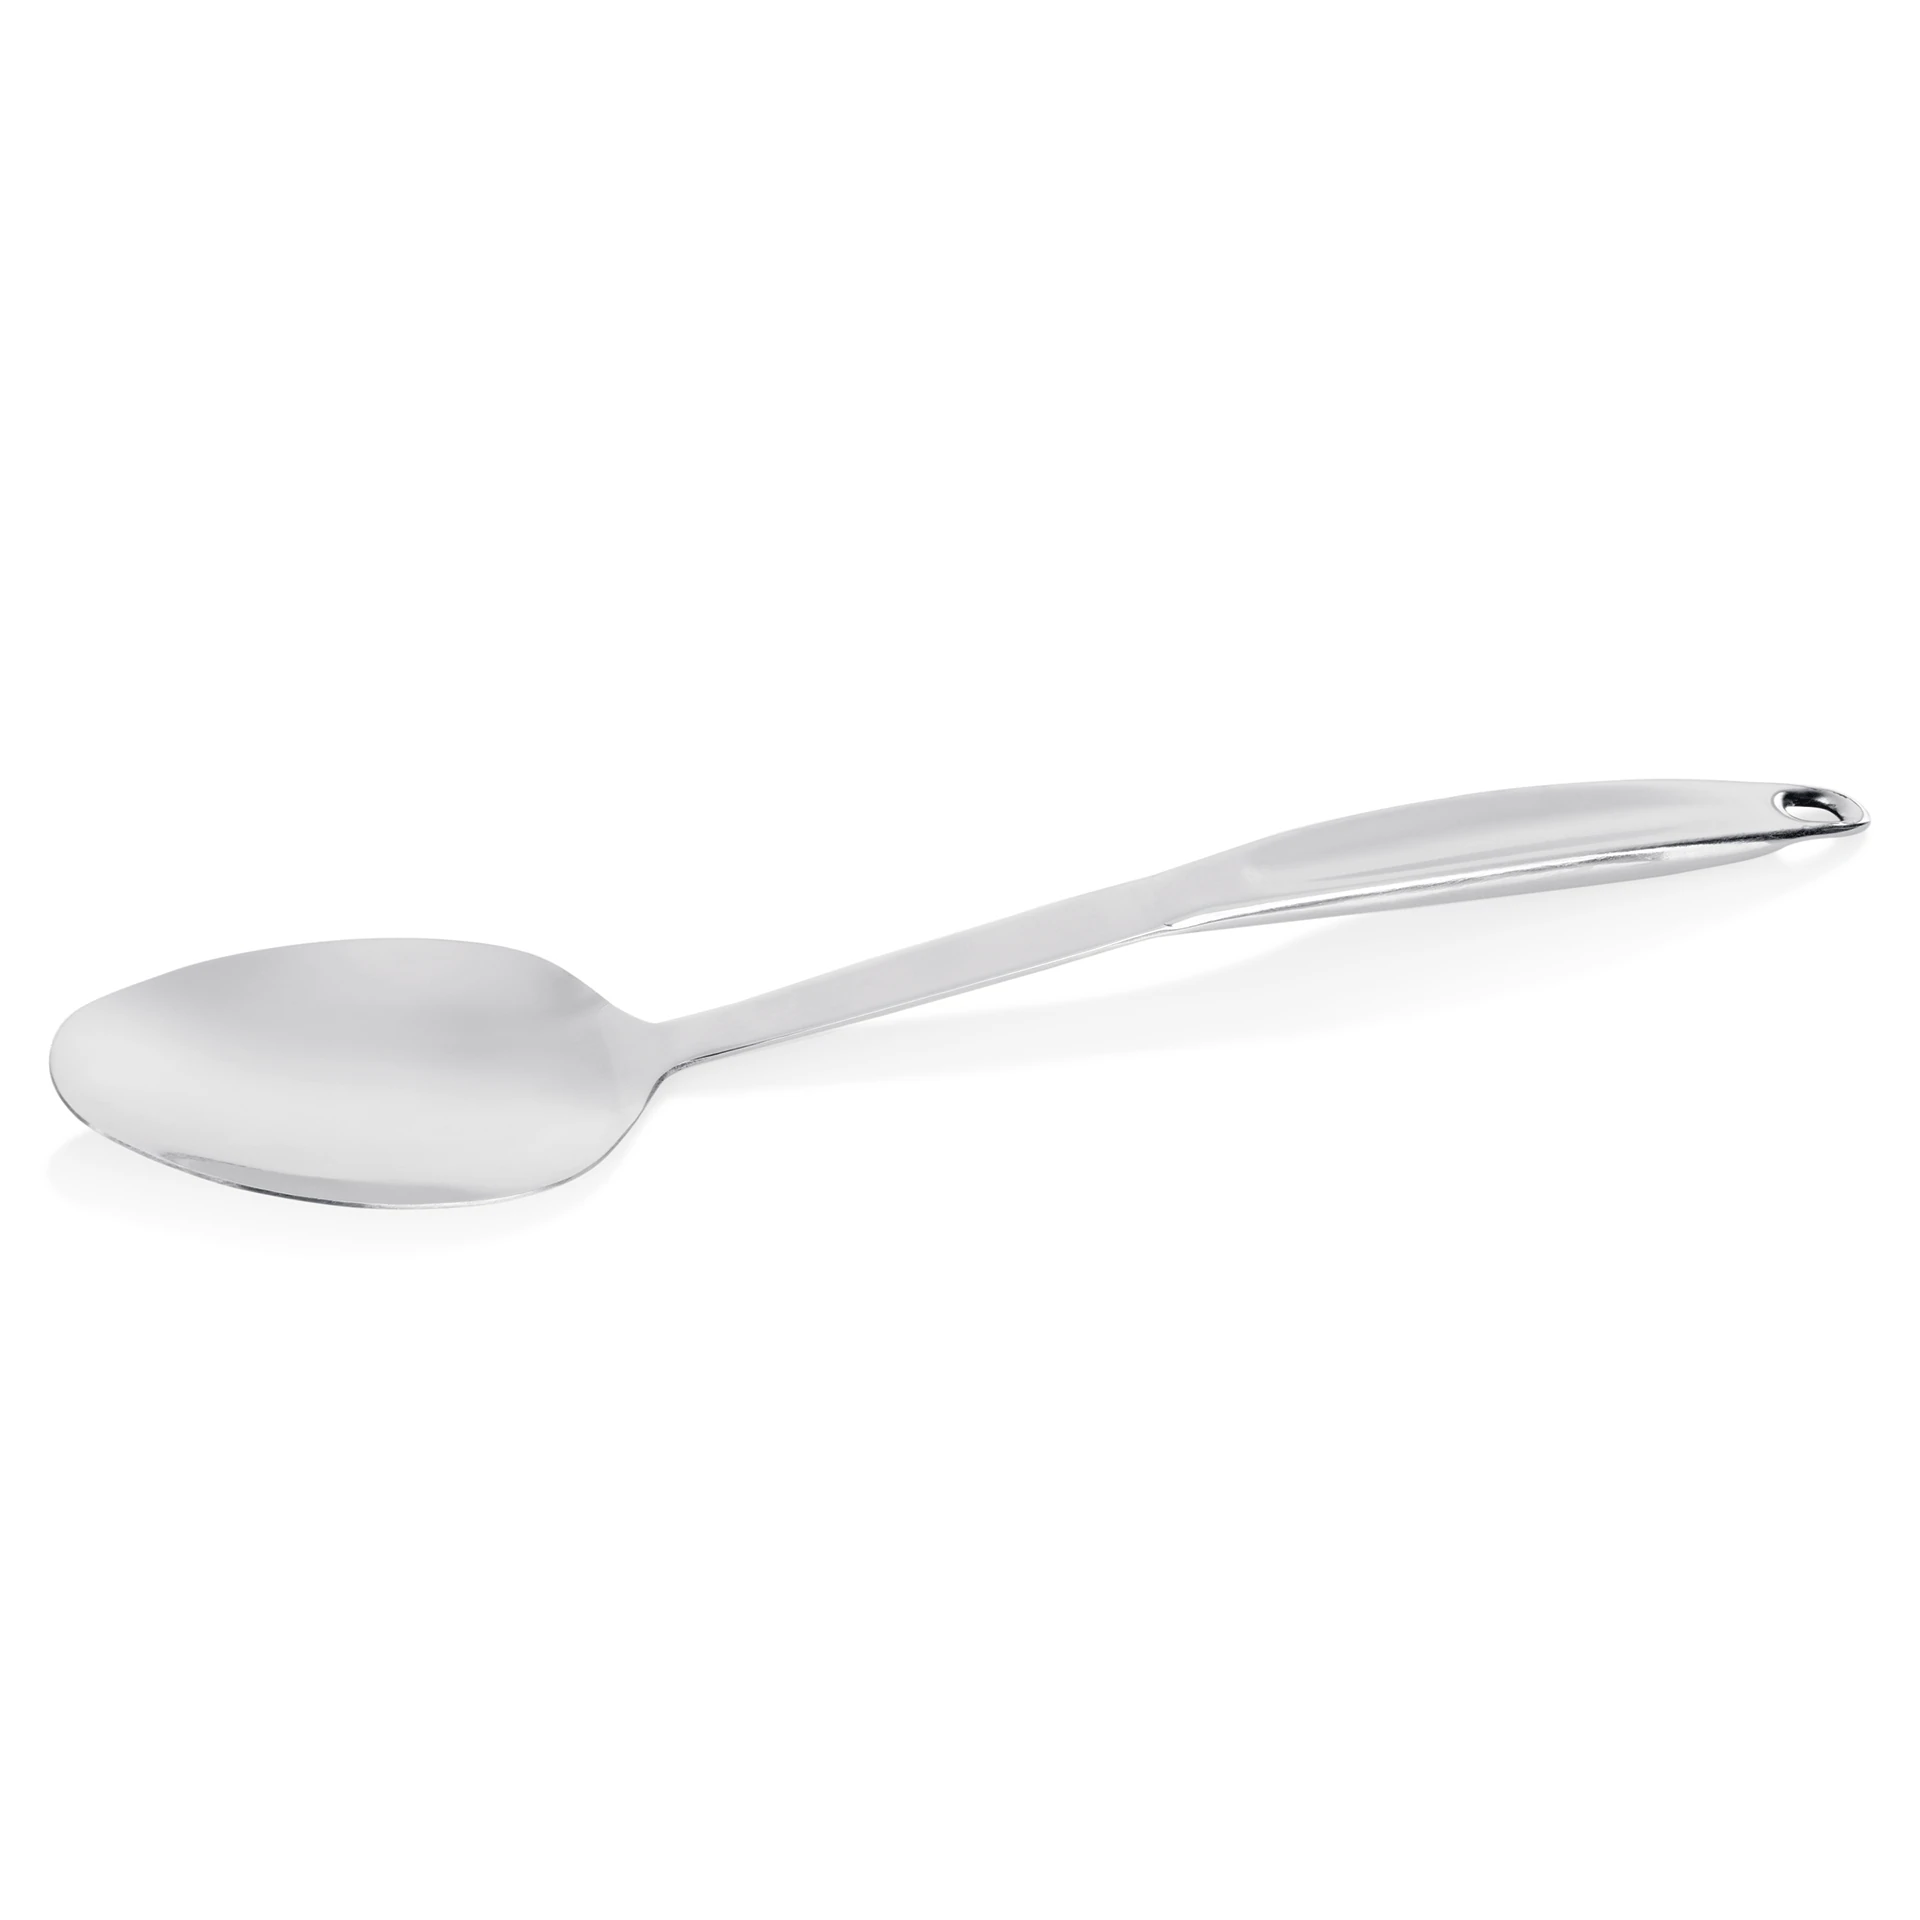 Serving spoon Kitchen Tool 2180